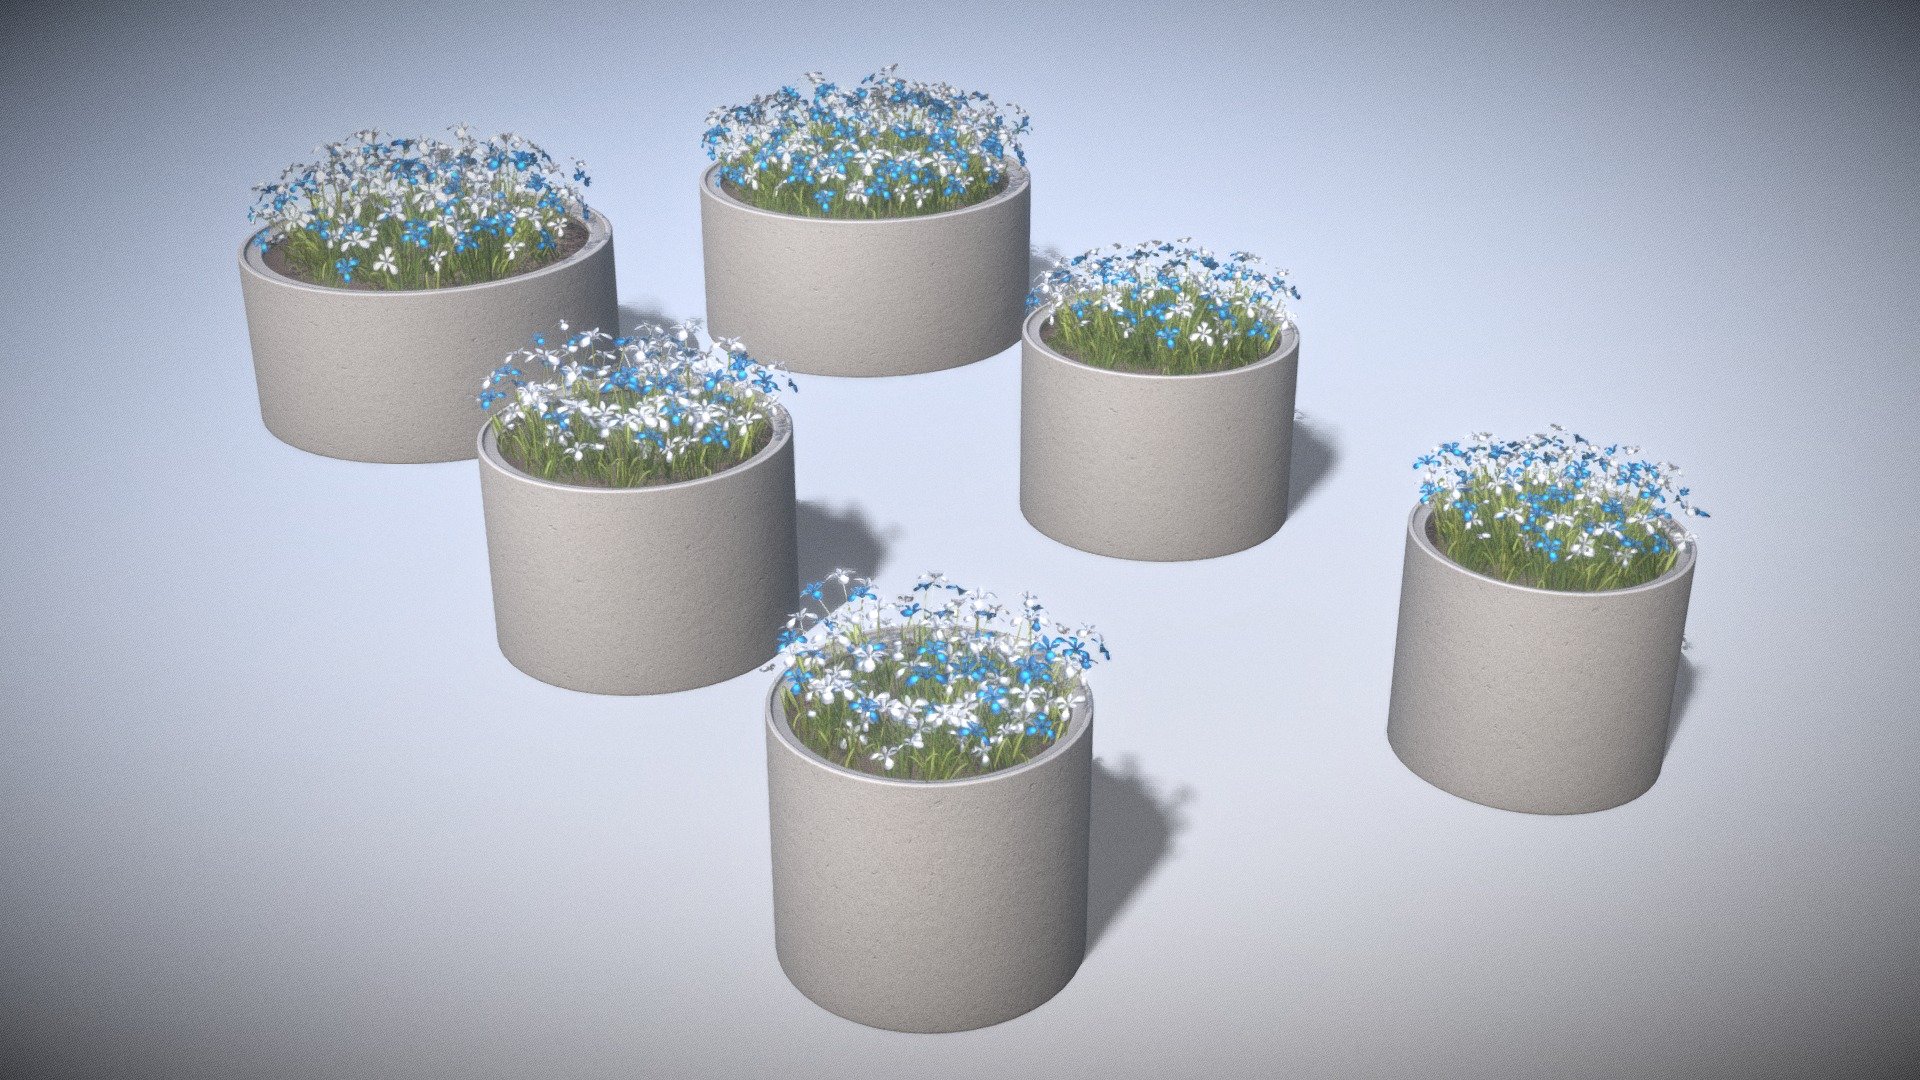 Some concrete pipe pots with blue and white mixed flowers.

Parts:

Object - Concrete_pot_800mm_White_Blue _Flowers_1 
Dimensions -  0.871m x 0.850m x 0.931m
Vertices = 6348
Polygons = 4237



Object - Concrete_pot_800mm_White_Blue _Flowers_2 
Dimensions -  0.865m x 0.812m x 0.956m
Vertices = 9589
Polygons = 5682



Object - Concrete_pot_1000mm_White_Blue _Flowers_1 
Dimensions -  1.038m x 1.018m x 0.977m
Vertices = 6388
Polygons = 4247



Object - Concrete_pot_1000mm_White_Blue _Flowers_2 
Dimensions -  1.014m x 1.021m x 0.978m
Vertices = 9669
Polygons = 5702



Object - Concrete_pot_1500mm_White_Blue _Flowers_1 
Dimensions -  1.500m x 1.500m x 1.102m
Vertices = 10580
Polygons = 6525



Object - Concrete_pot_1500mm_White_Blue _Flowers_2 
Dimensions -  1.549m x 1.526m x 1.140m
Vertices = 18053
Polygons = 10258

Modeled and textured by 3DHaupt in Blender-2.91 - Concrete Pipe Pots with Blue White Flowers - Buy Royalty Free 3D model by VIS-All-3D (@VIS-All) 3d model